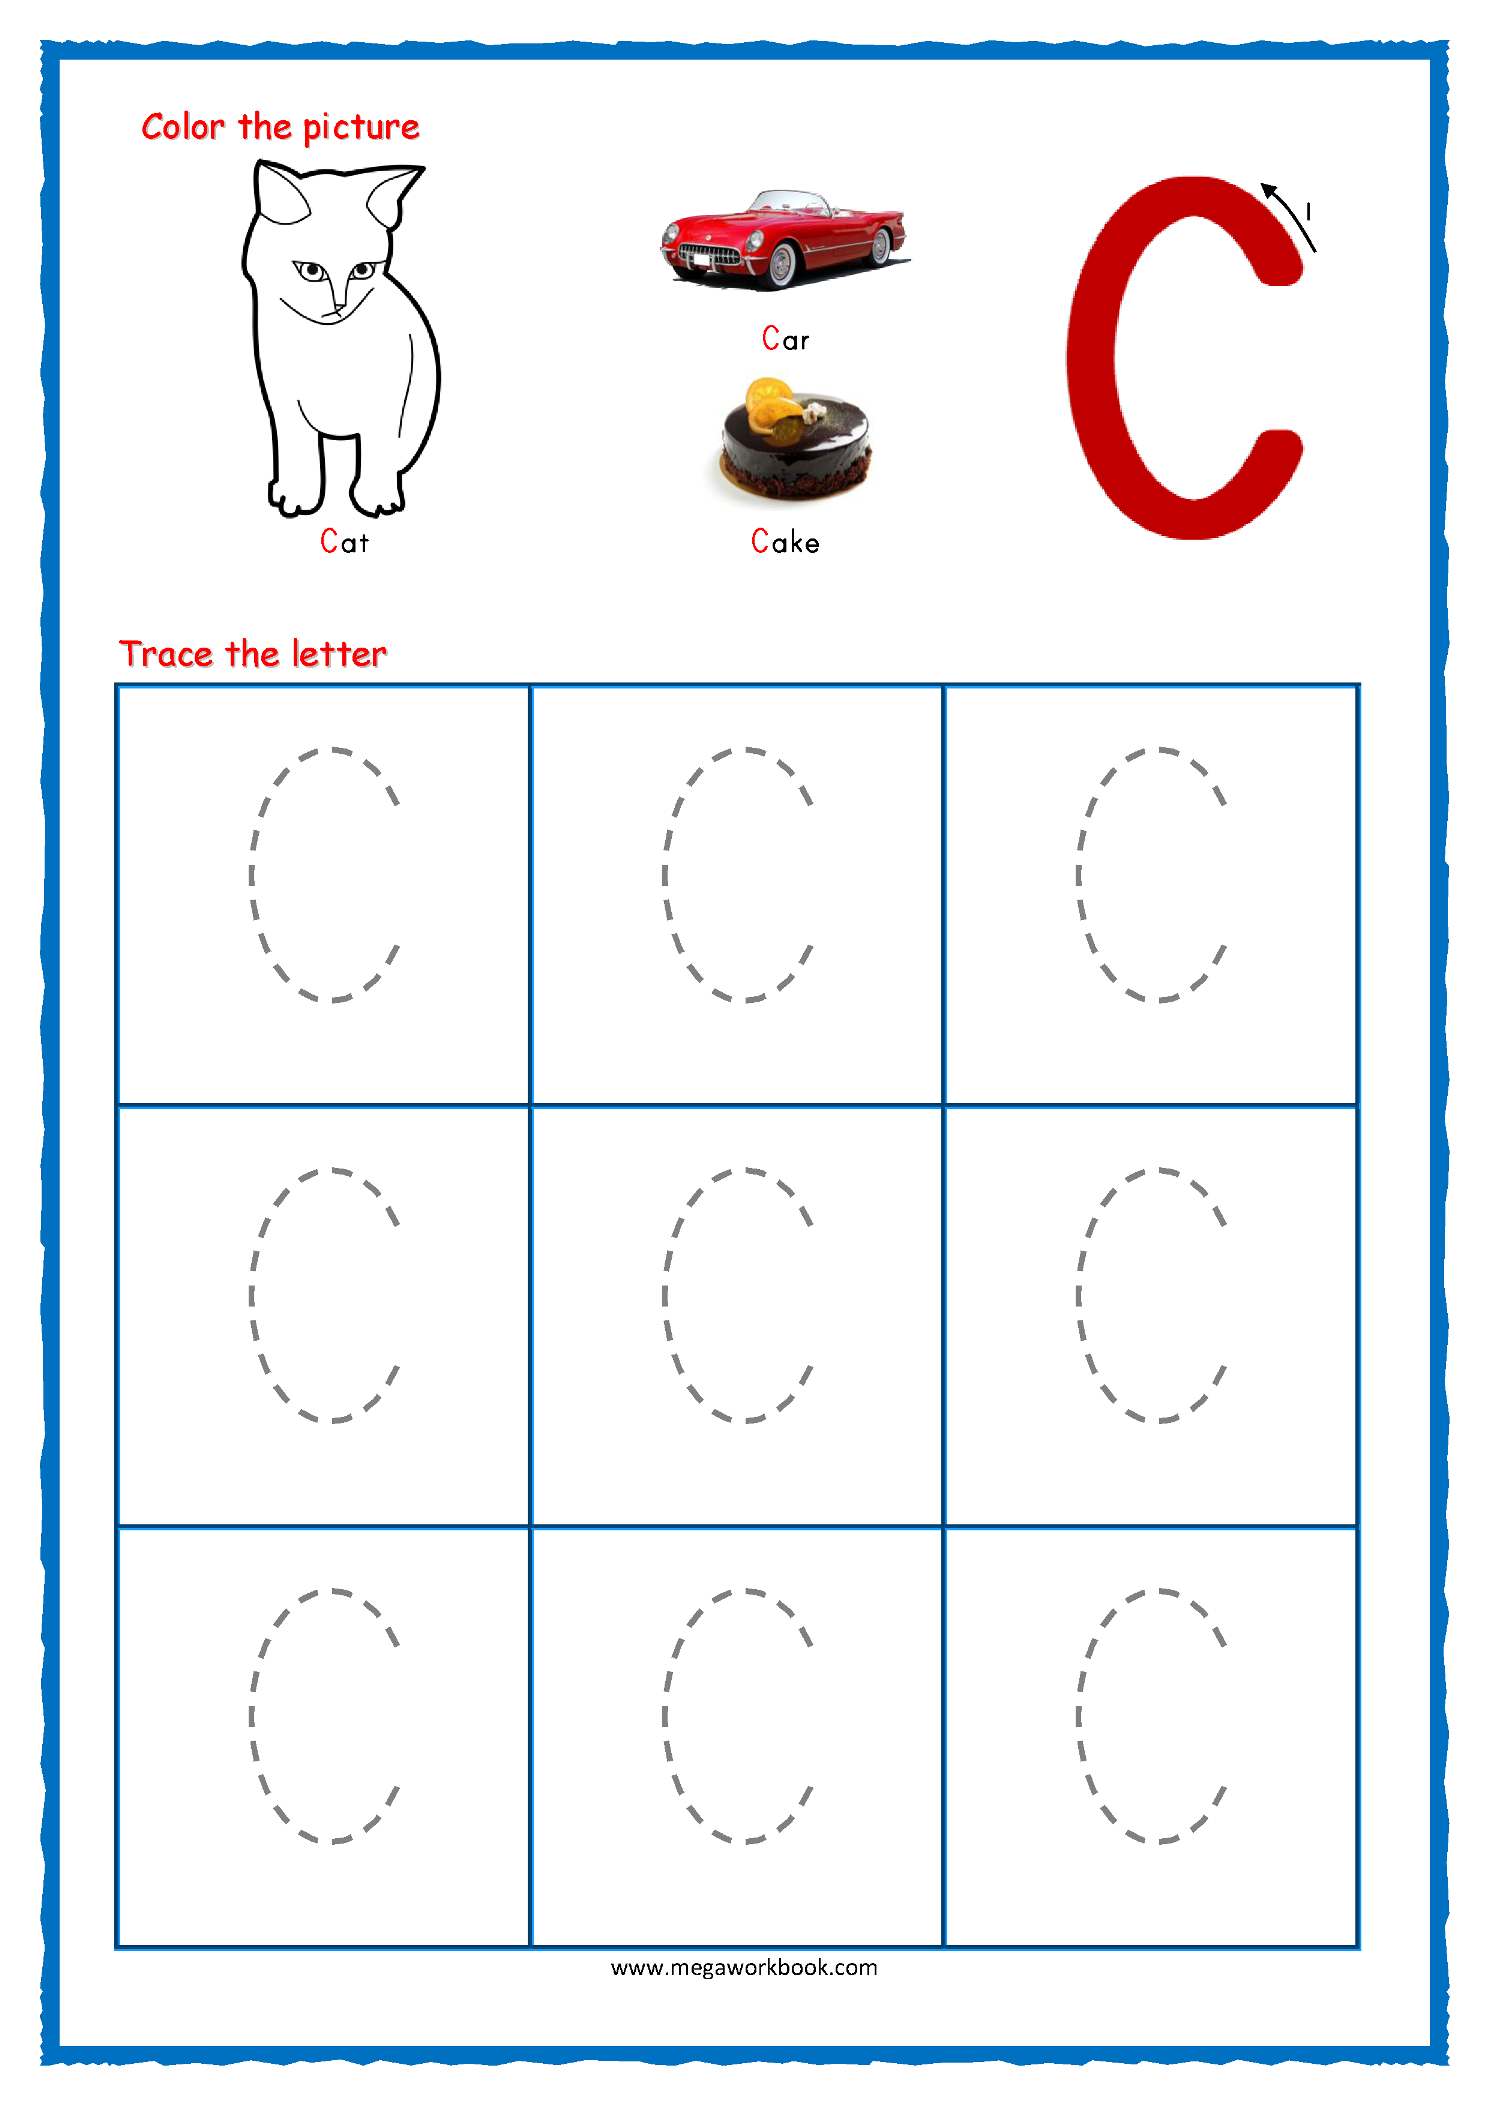 Tracing Letters - Alphabet Tracing - Capital Letters pertaining to Alphabet Tracing Book Pdf